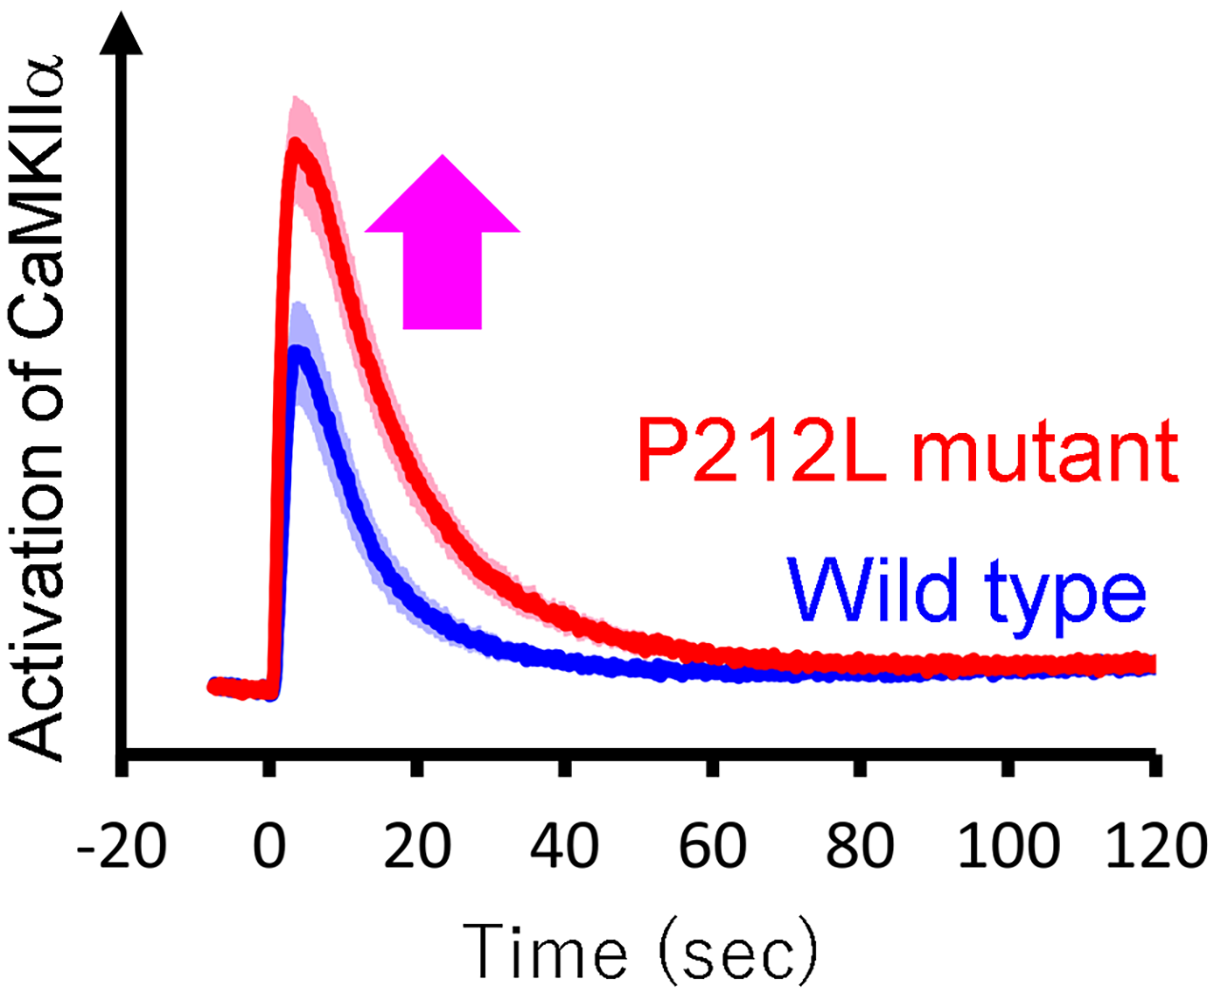 Graph with two lines, one showing regular activity and one showing irregular activity caused by the P212L mutation of CaMKIIalpha.